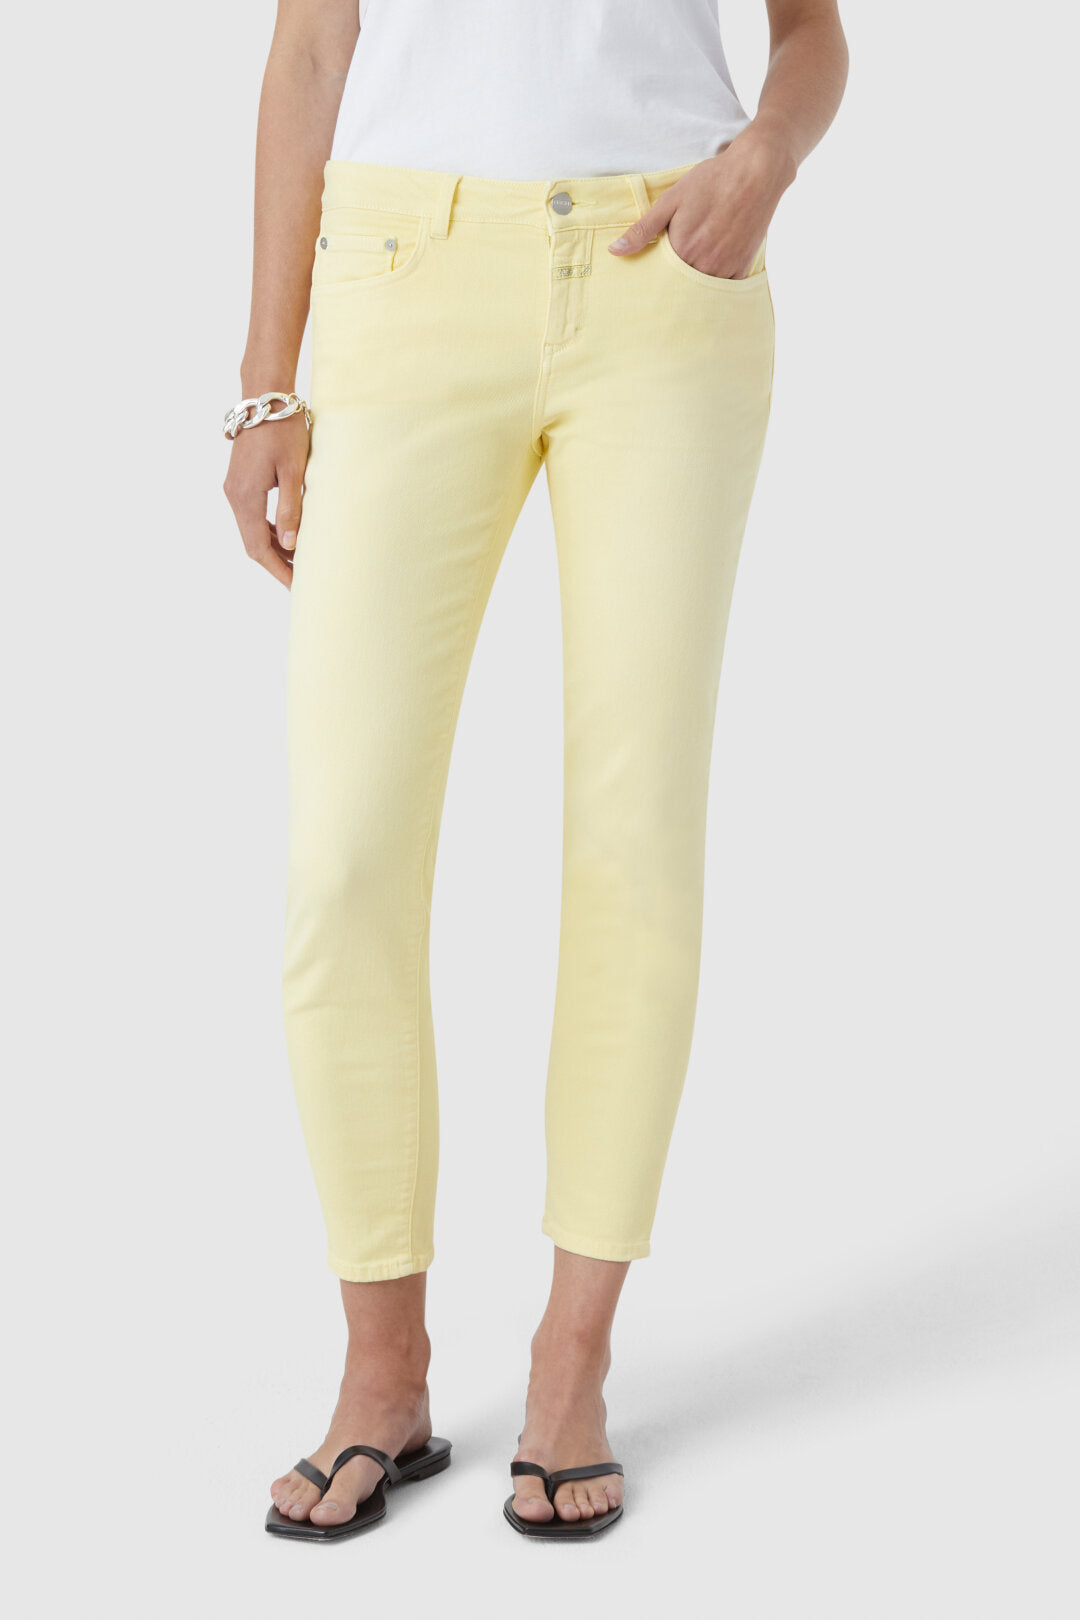 Closes Baker Yellow Orchid Jean